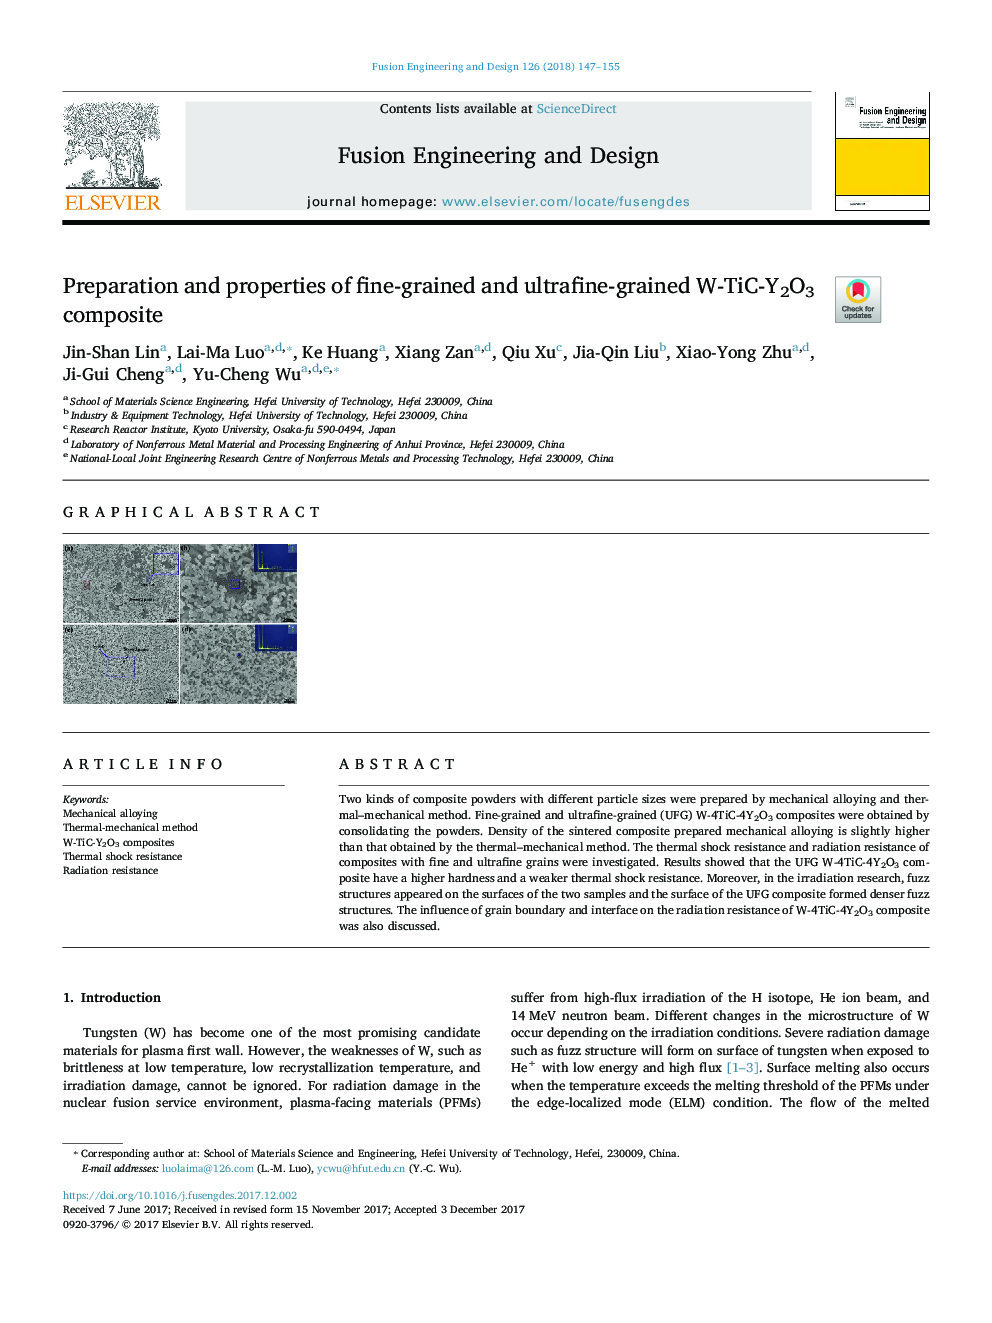 Preparation and properties of fine-grained and ultrafine-grained W-TiC-Y2O3 composite